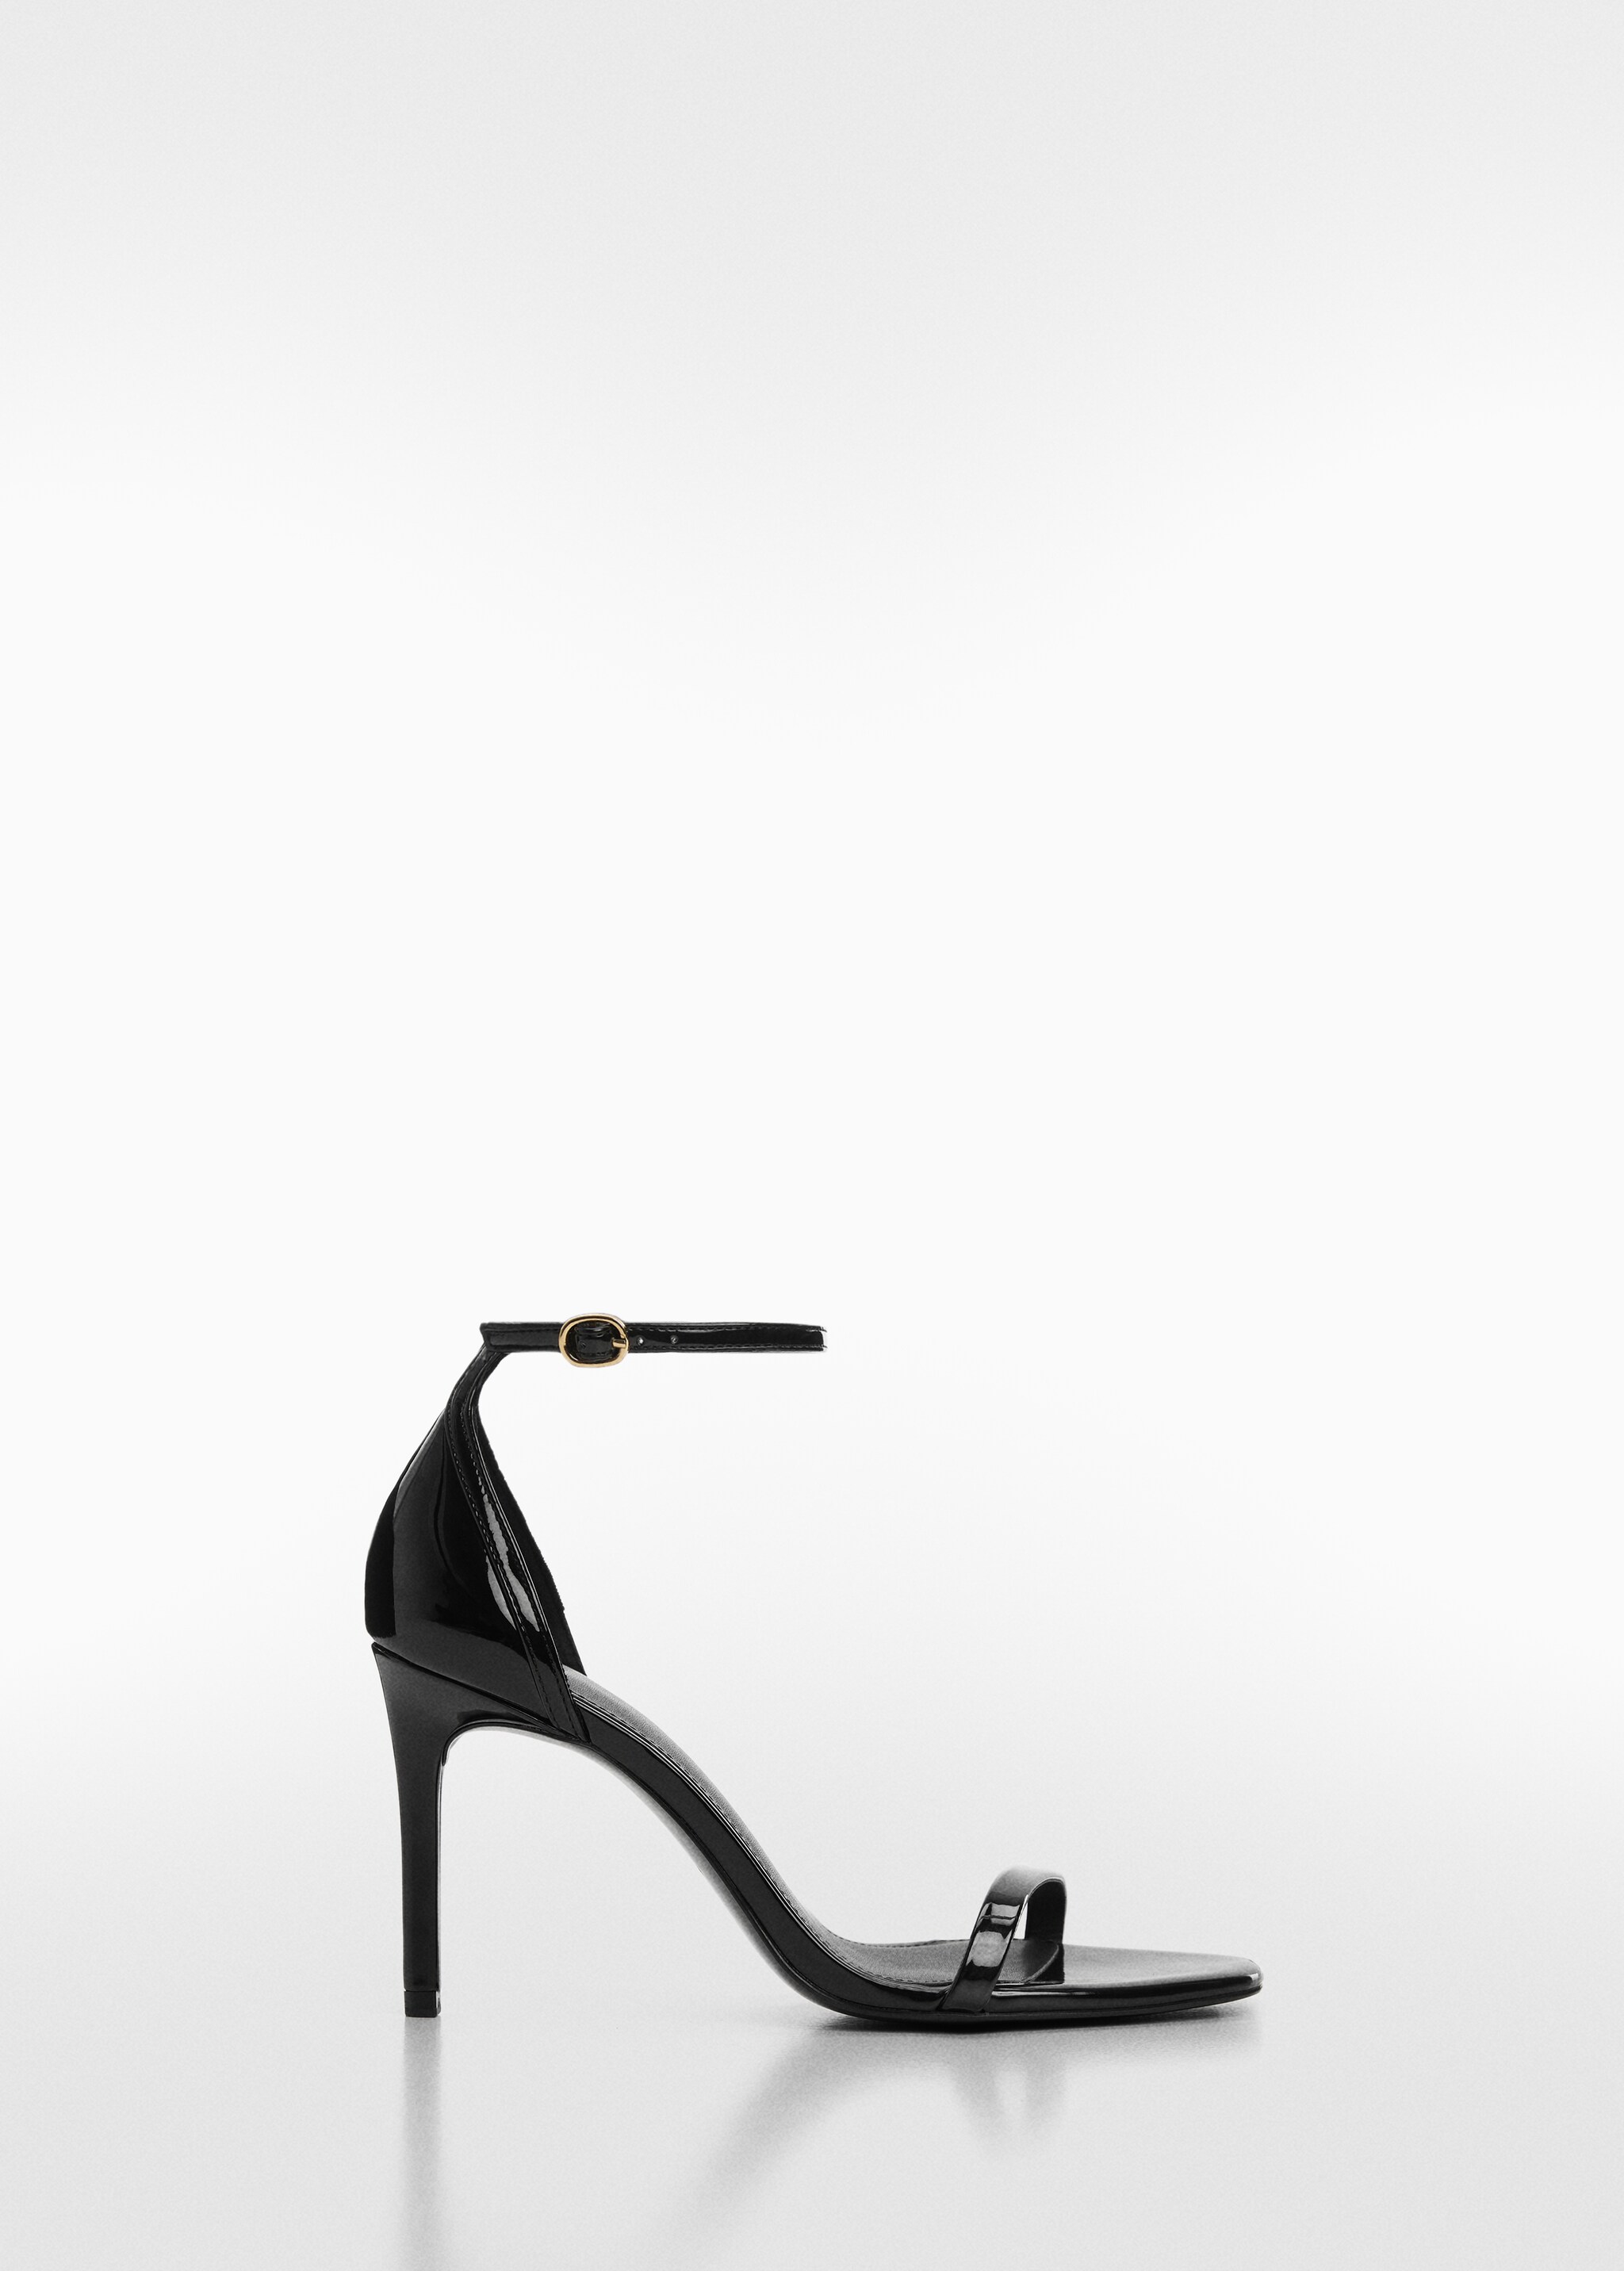 Patent leather effect heeled sandal - Article without model